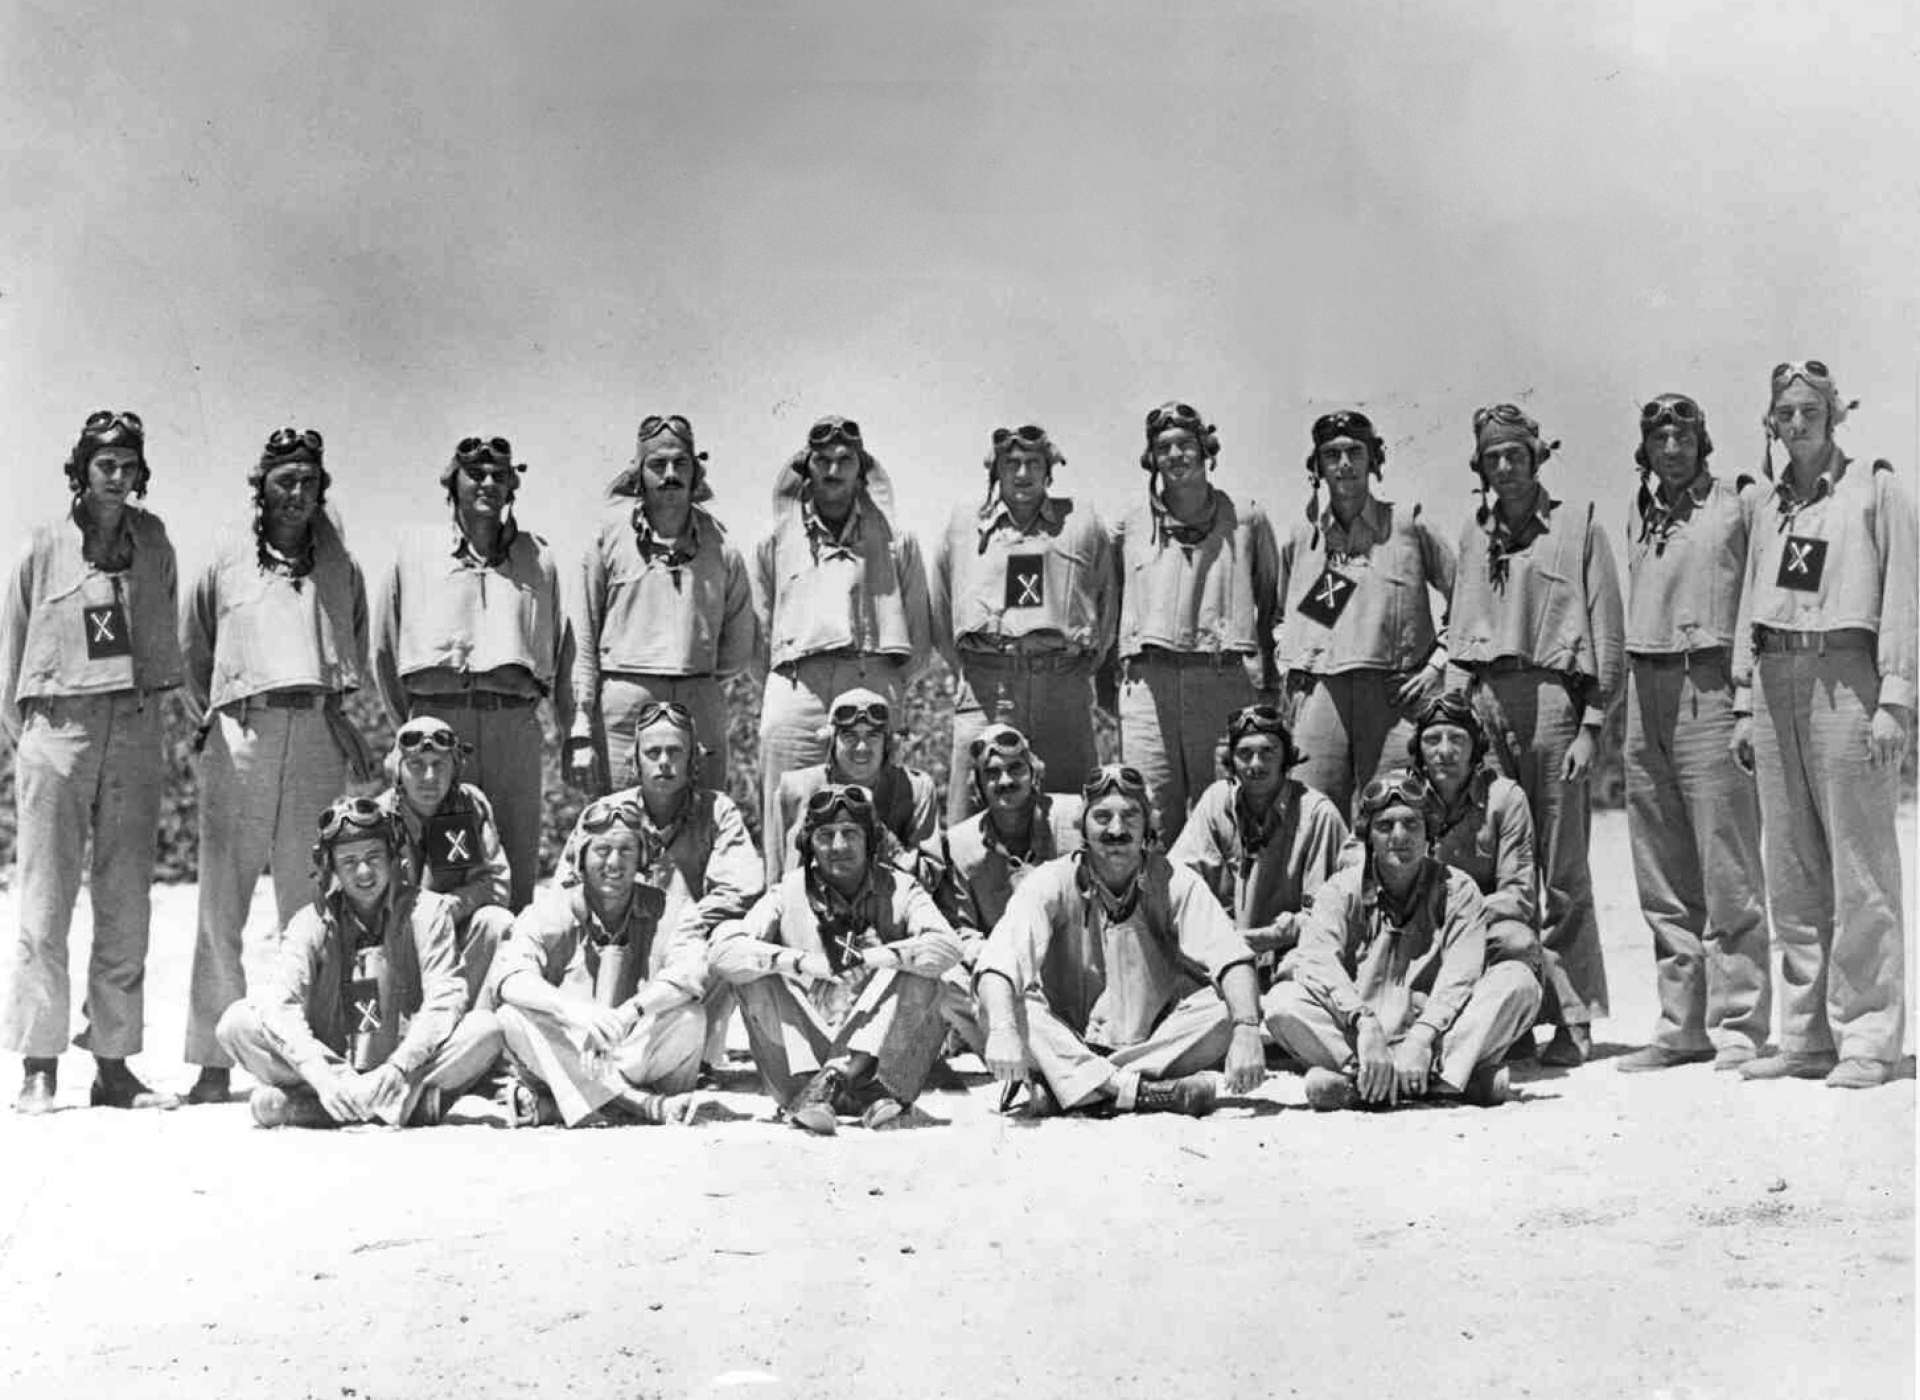 VMSB-241 pilots at Midway. Capt. Fleming is in the top row, fourth from right. Those marked with an “x” were killed during the Battle at Midway. Official U.S. Navy photograph.